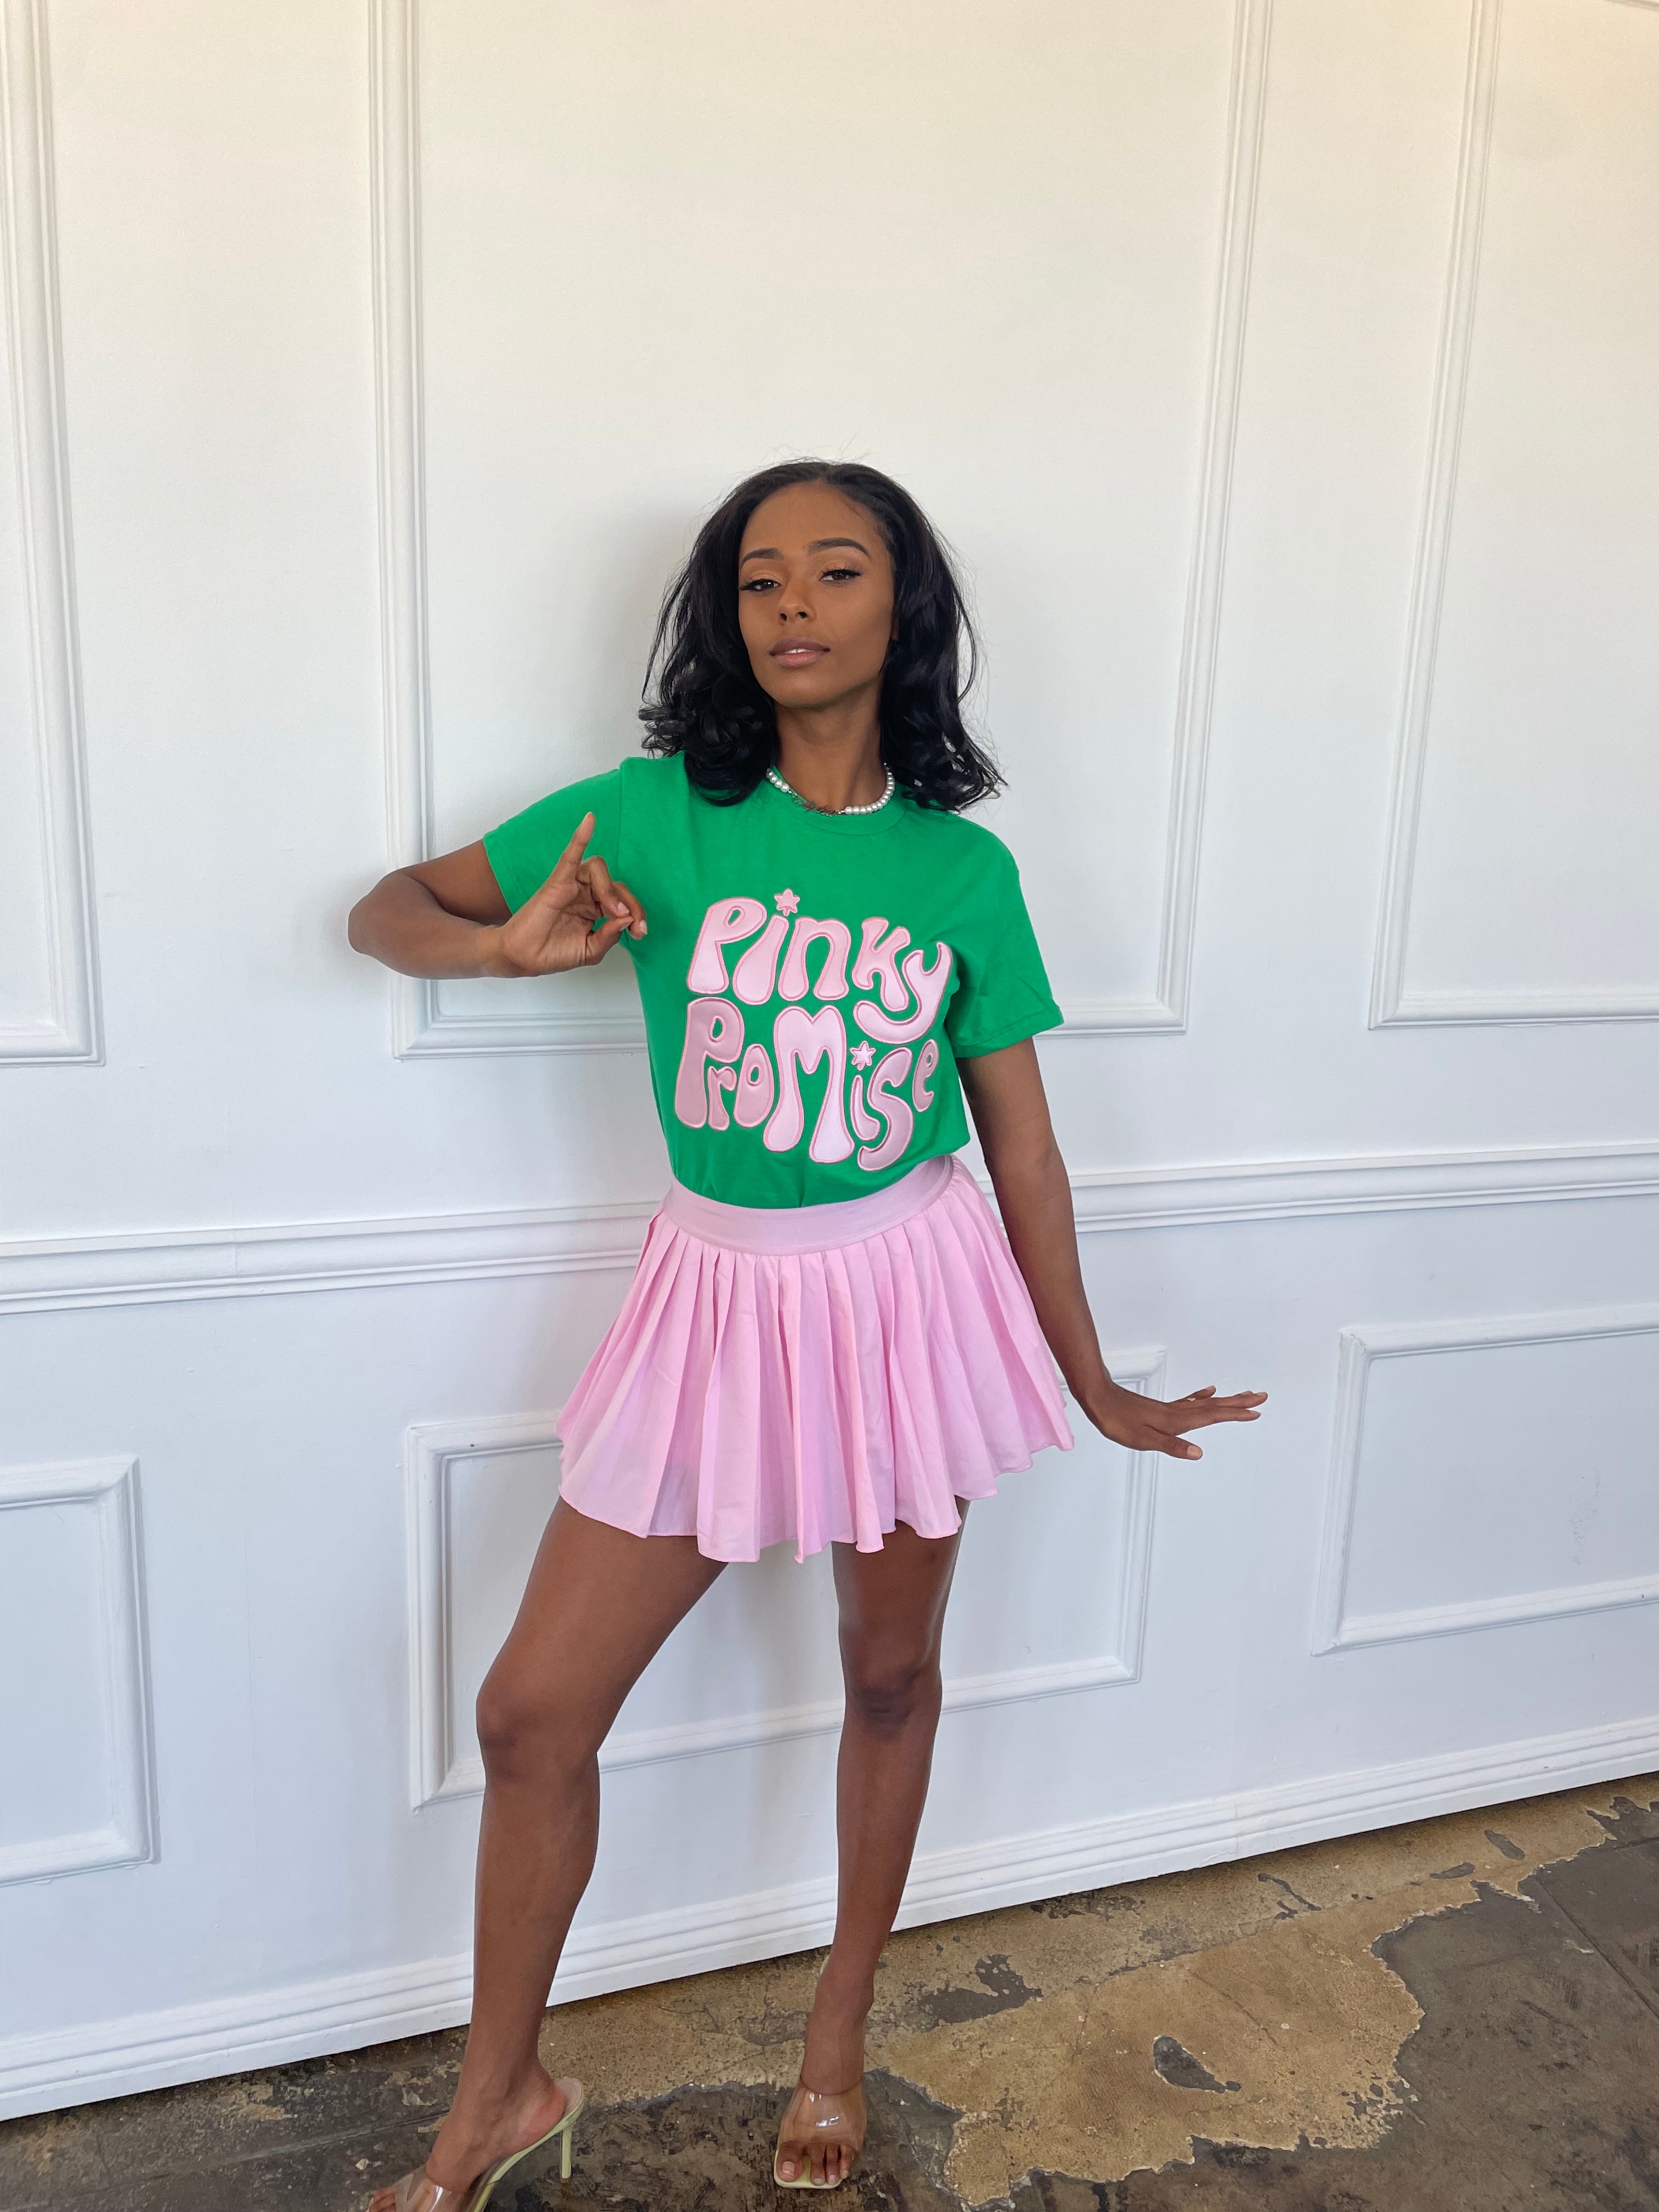 Pinky Promise Tee in Green (Ships on (4/24)